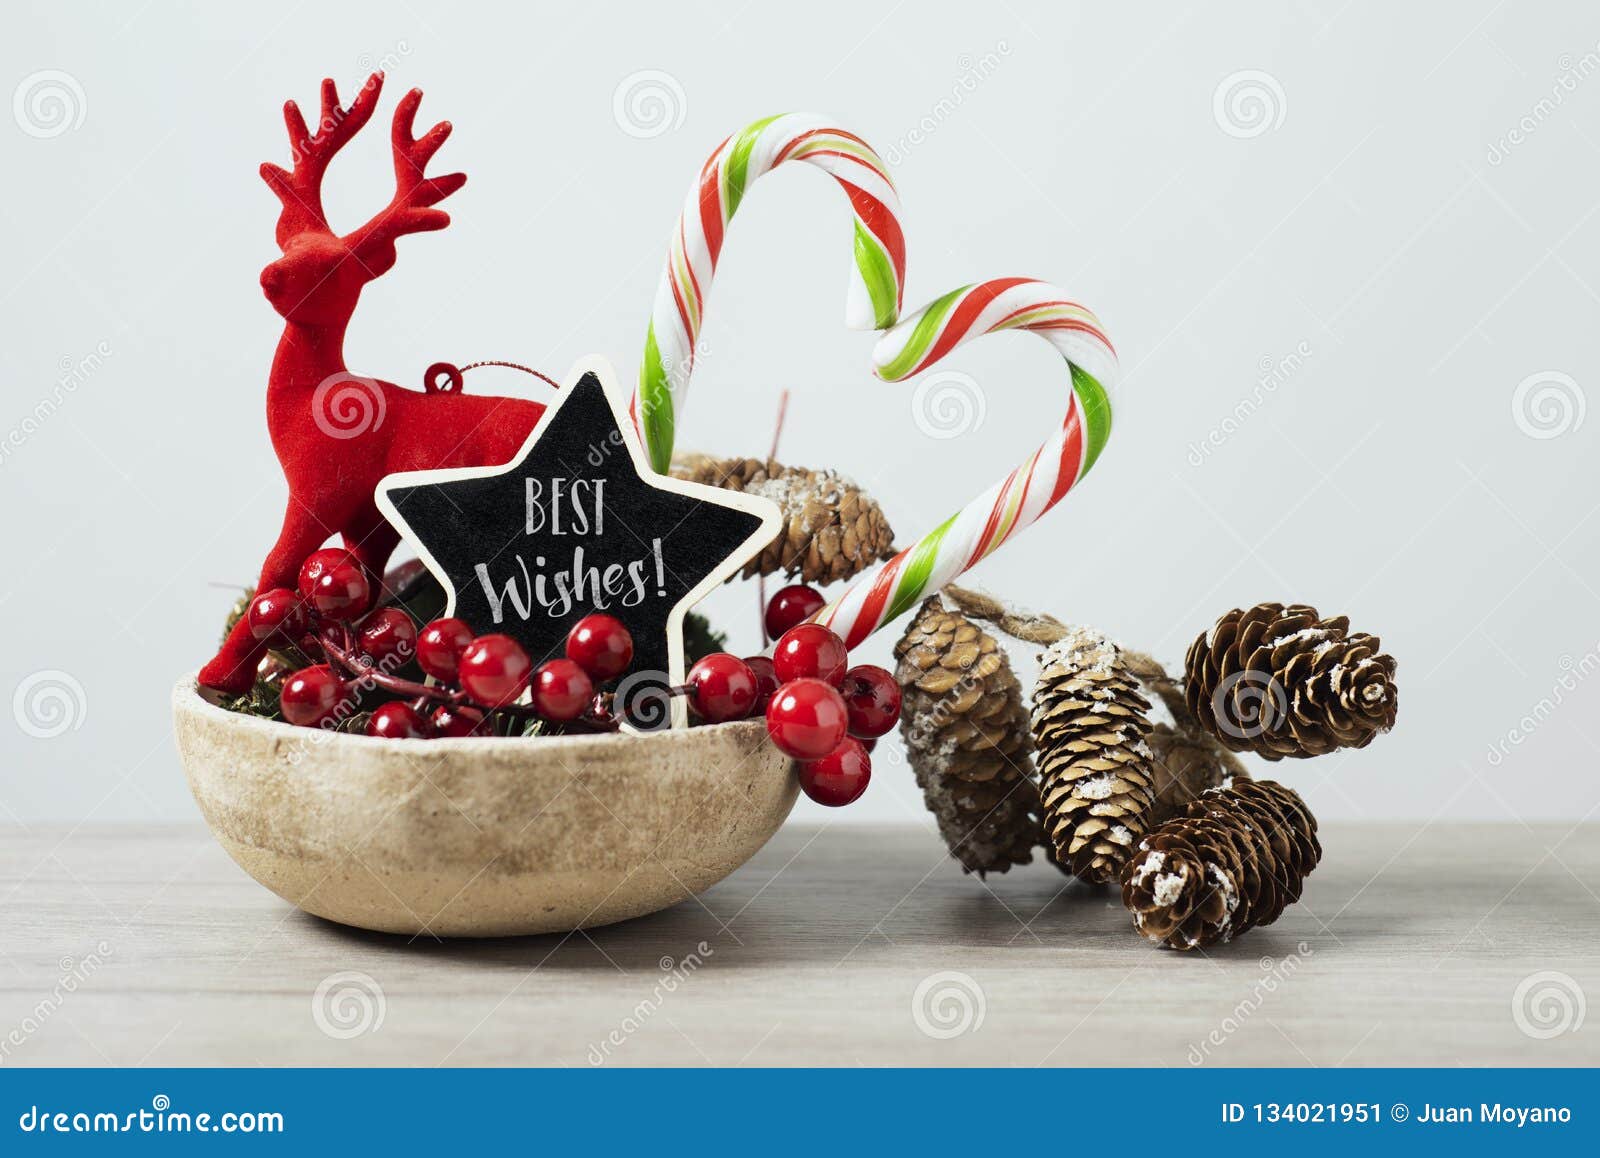 Christmas Ornaments And Text Best Wishes Stock Image Image Of